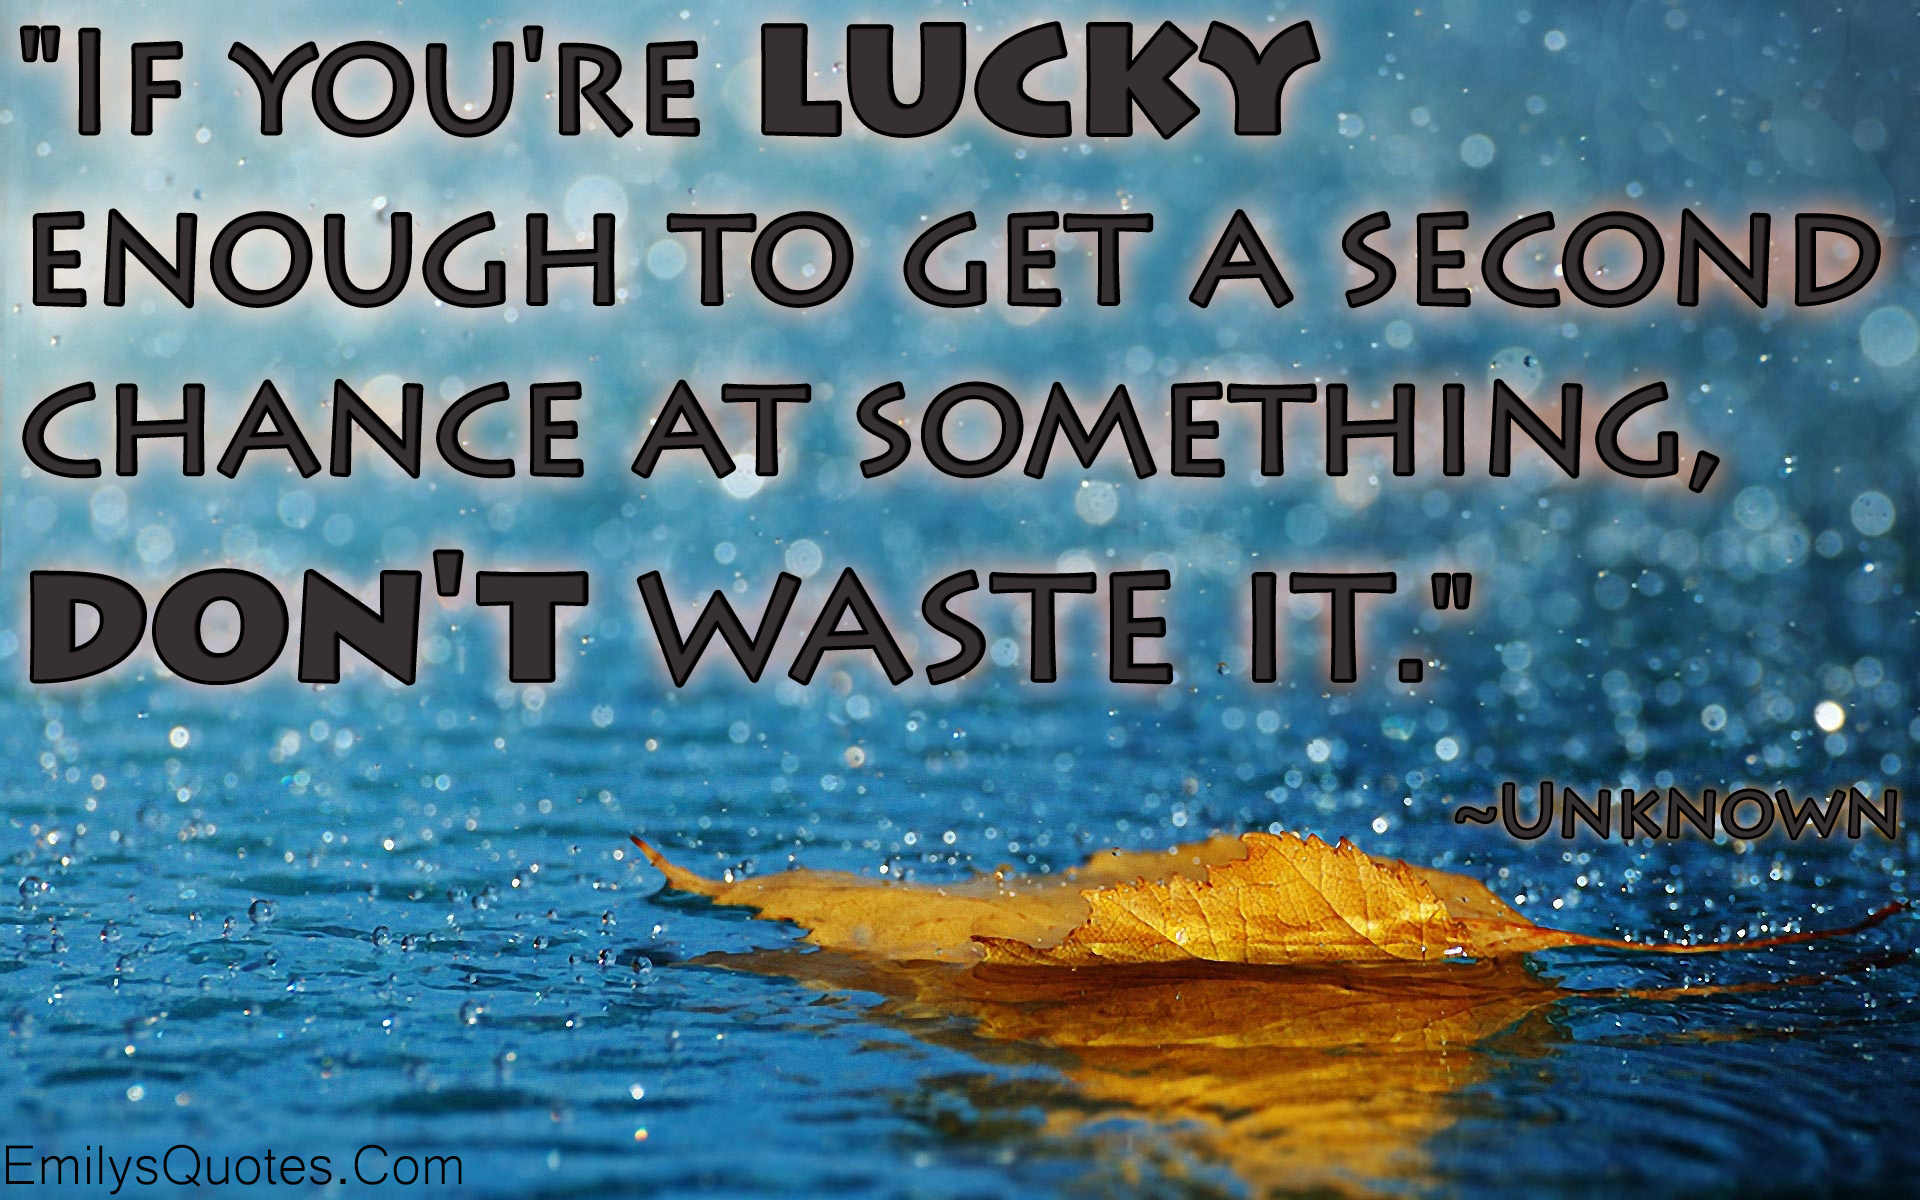 If you’re lucky enough to get a second chance at something, don’t waste it